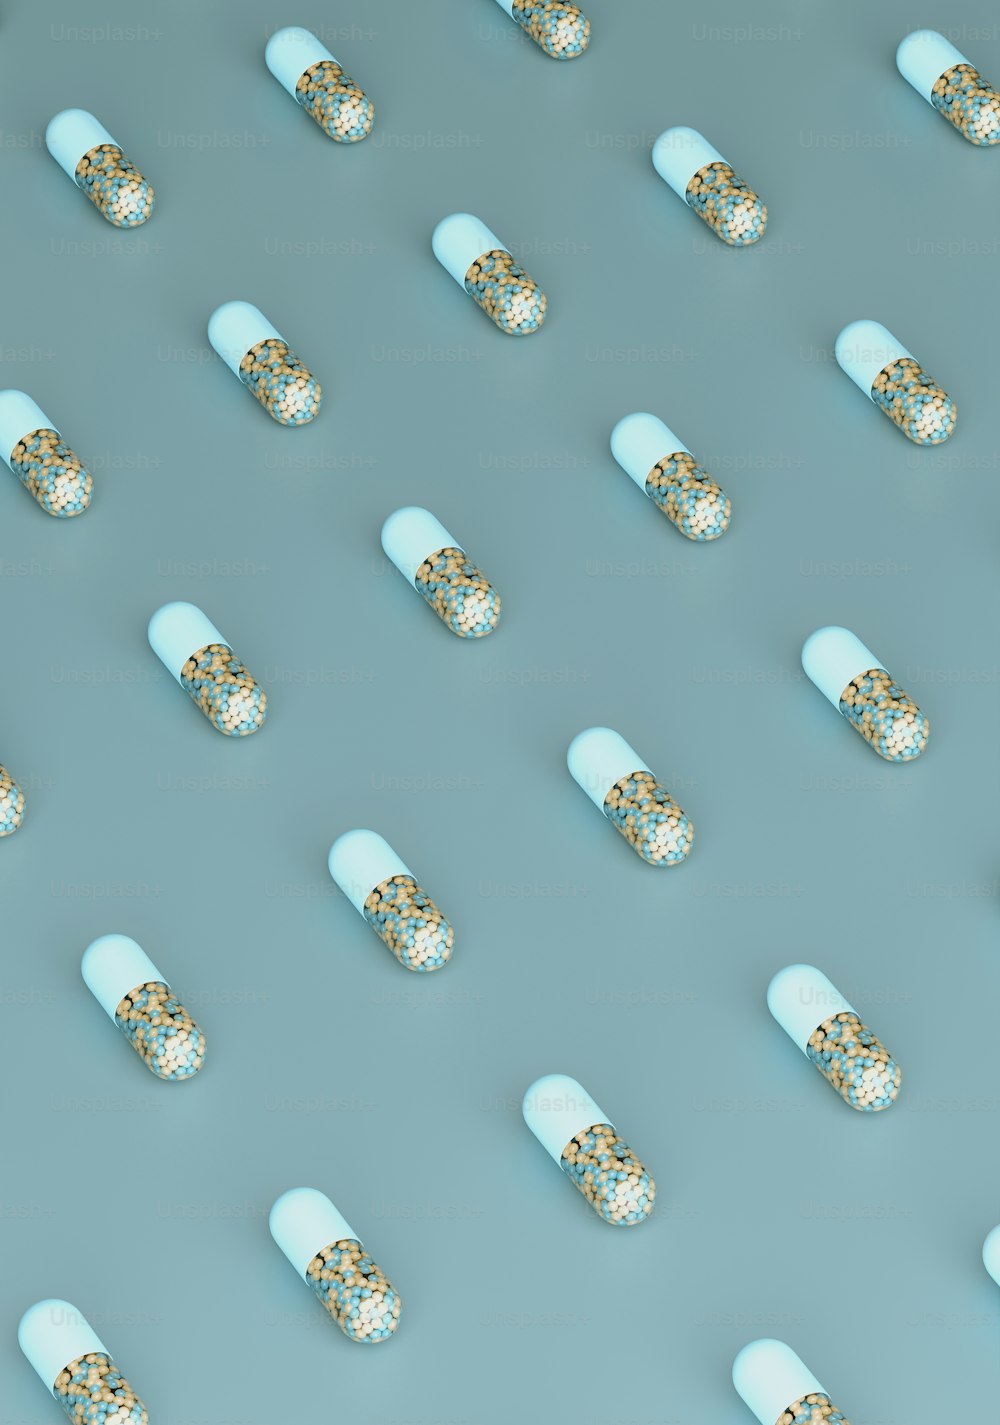 many pills are arranged in rows on a blue surface